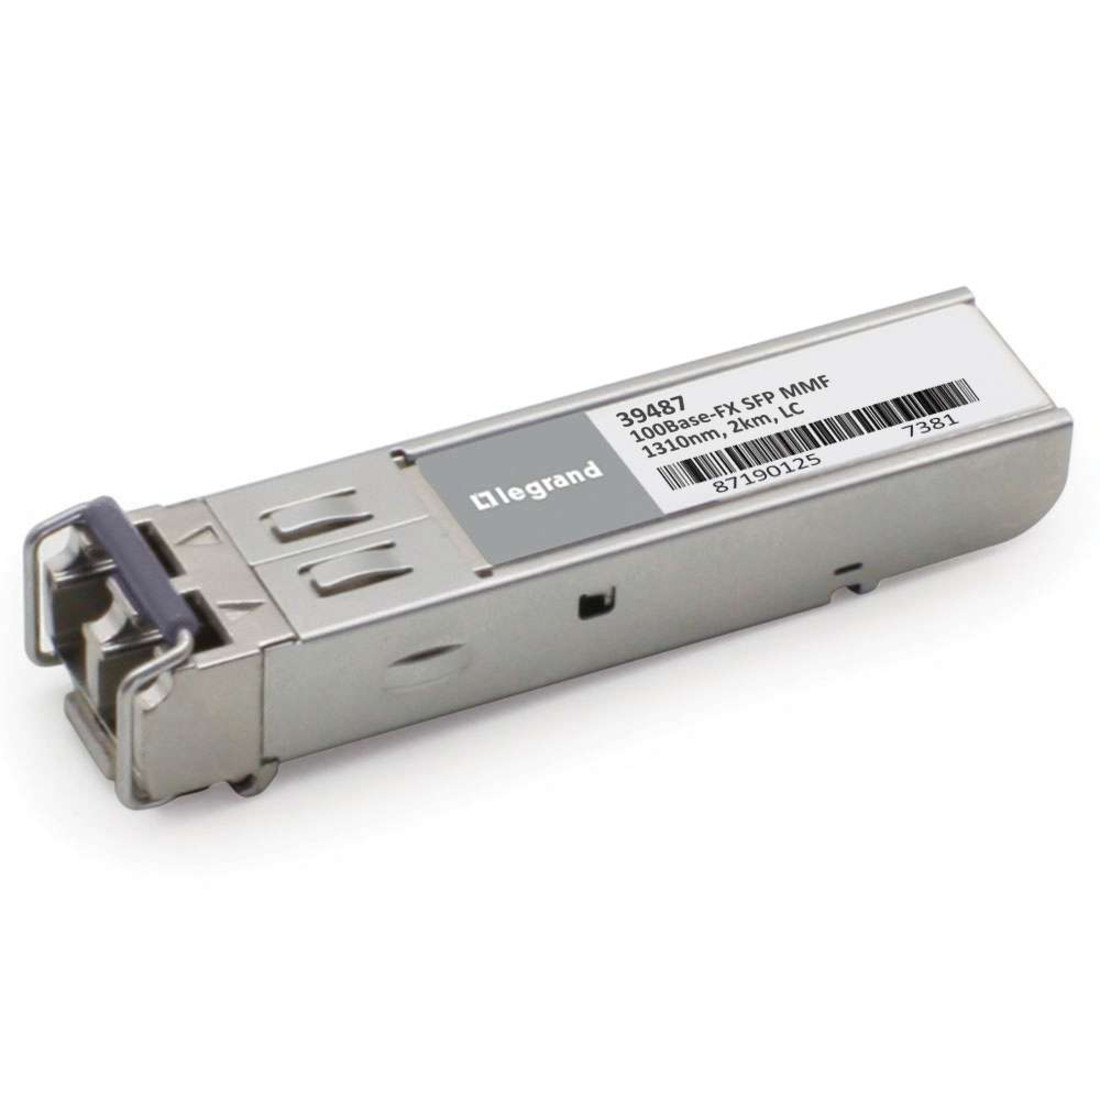 C2G HP J9054C Compatible 100Base-FX MMF SFP (mini-GBIC) Transceiver ModuleFor Optical Network, Data Networking1 x LC 100Base-FX NetworkOp… 39487